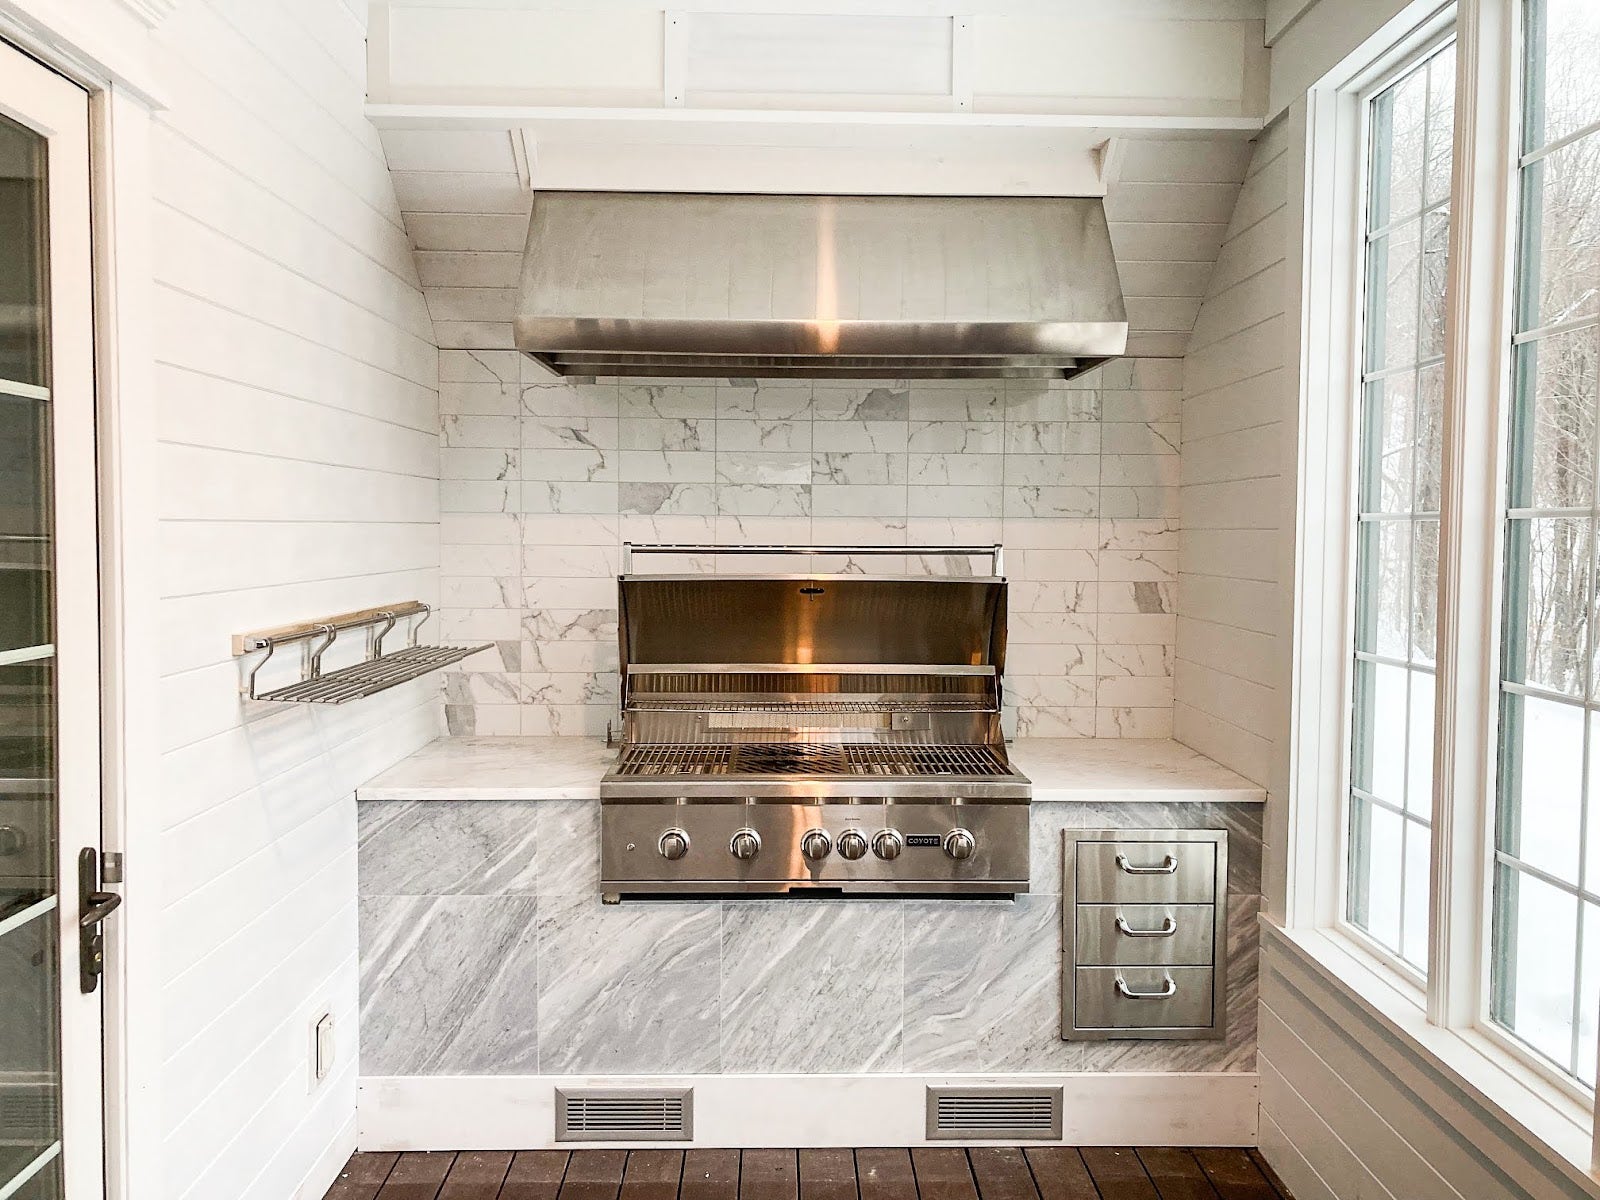 Luxurious indoor/outdoor white marble kitchen with a sleek Proline range hood and high-end grill, offering a clean and sophisticated cooking space - prolinerangehoods.com.